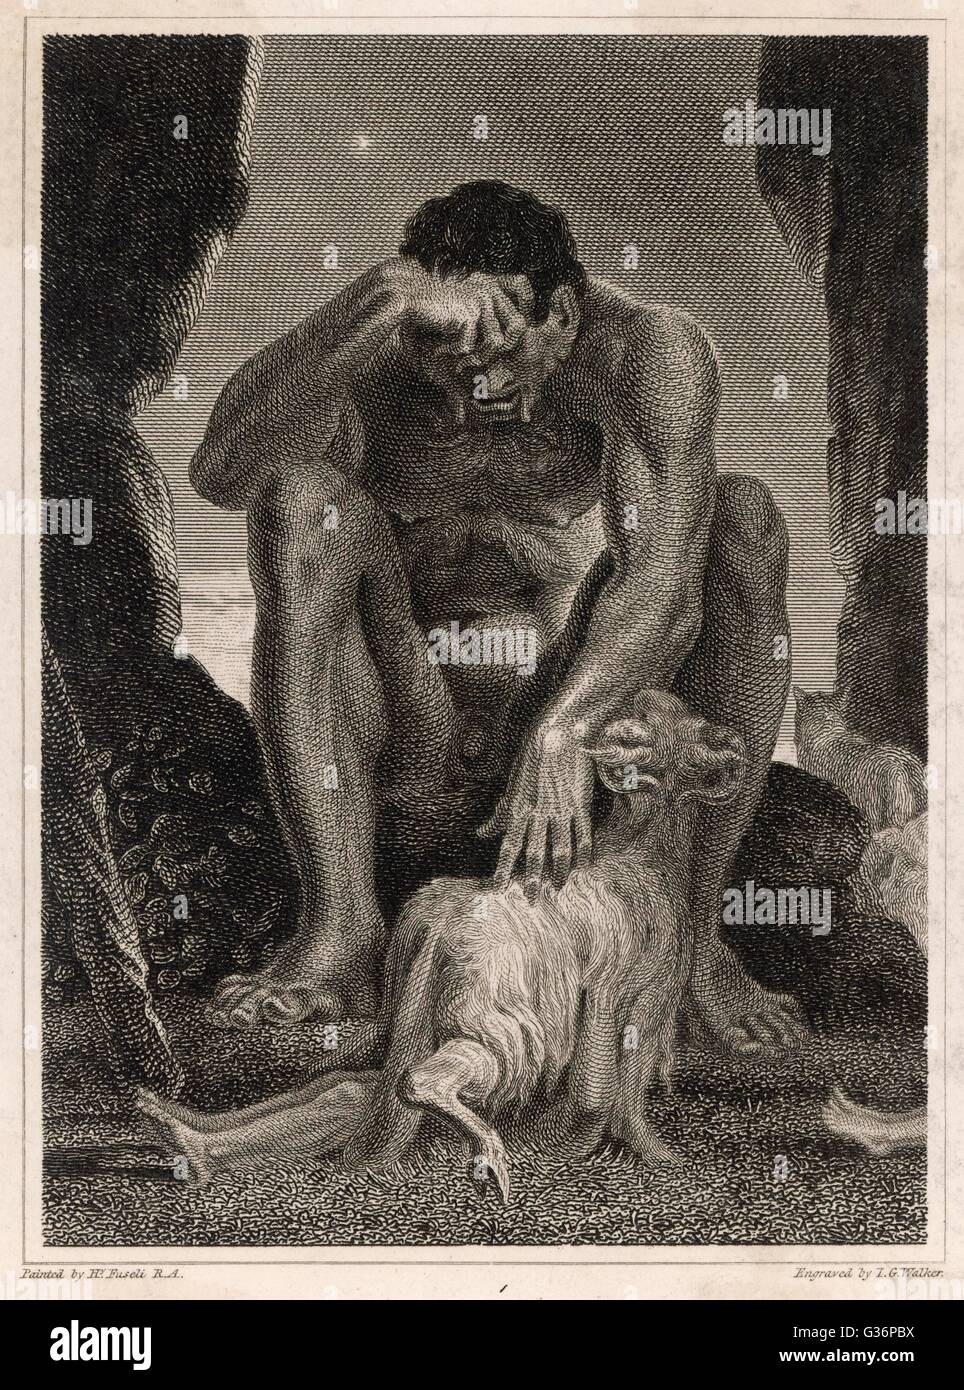 Polyphemus (Polyphemos) the Cyclops, the gigantic one-eyed son of Poseidon and Thoosa, seen here in his cave with one of his sheep.  In Homer's Odyssey he kills and eats several of Odysseus's men.  Odysseus gives him wine which makes him sleepy, and when Stock Photo